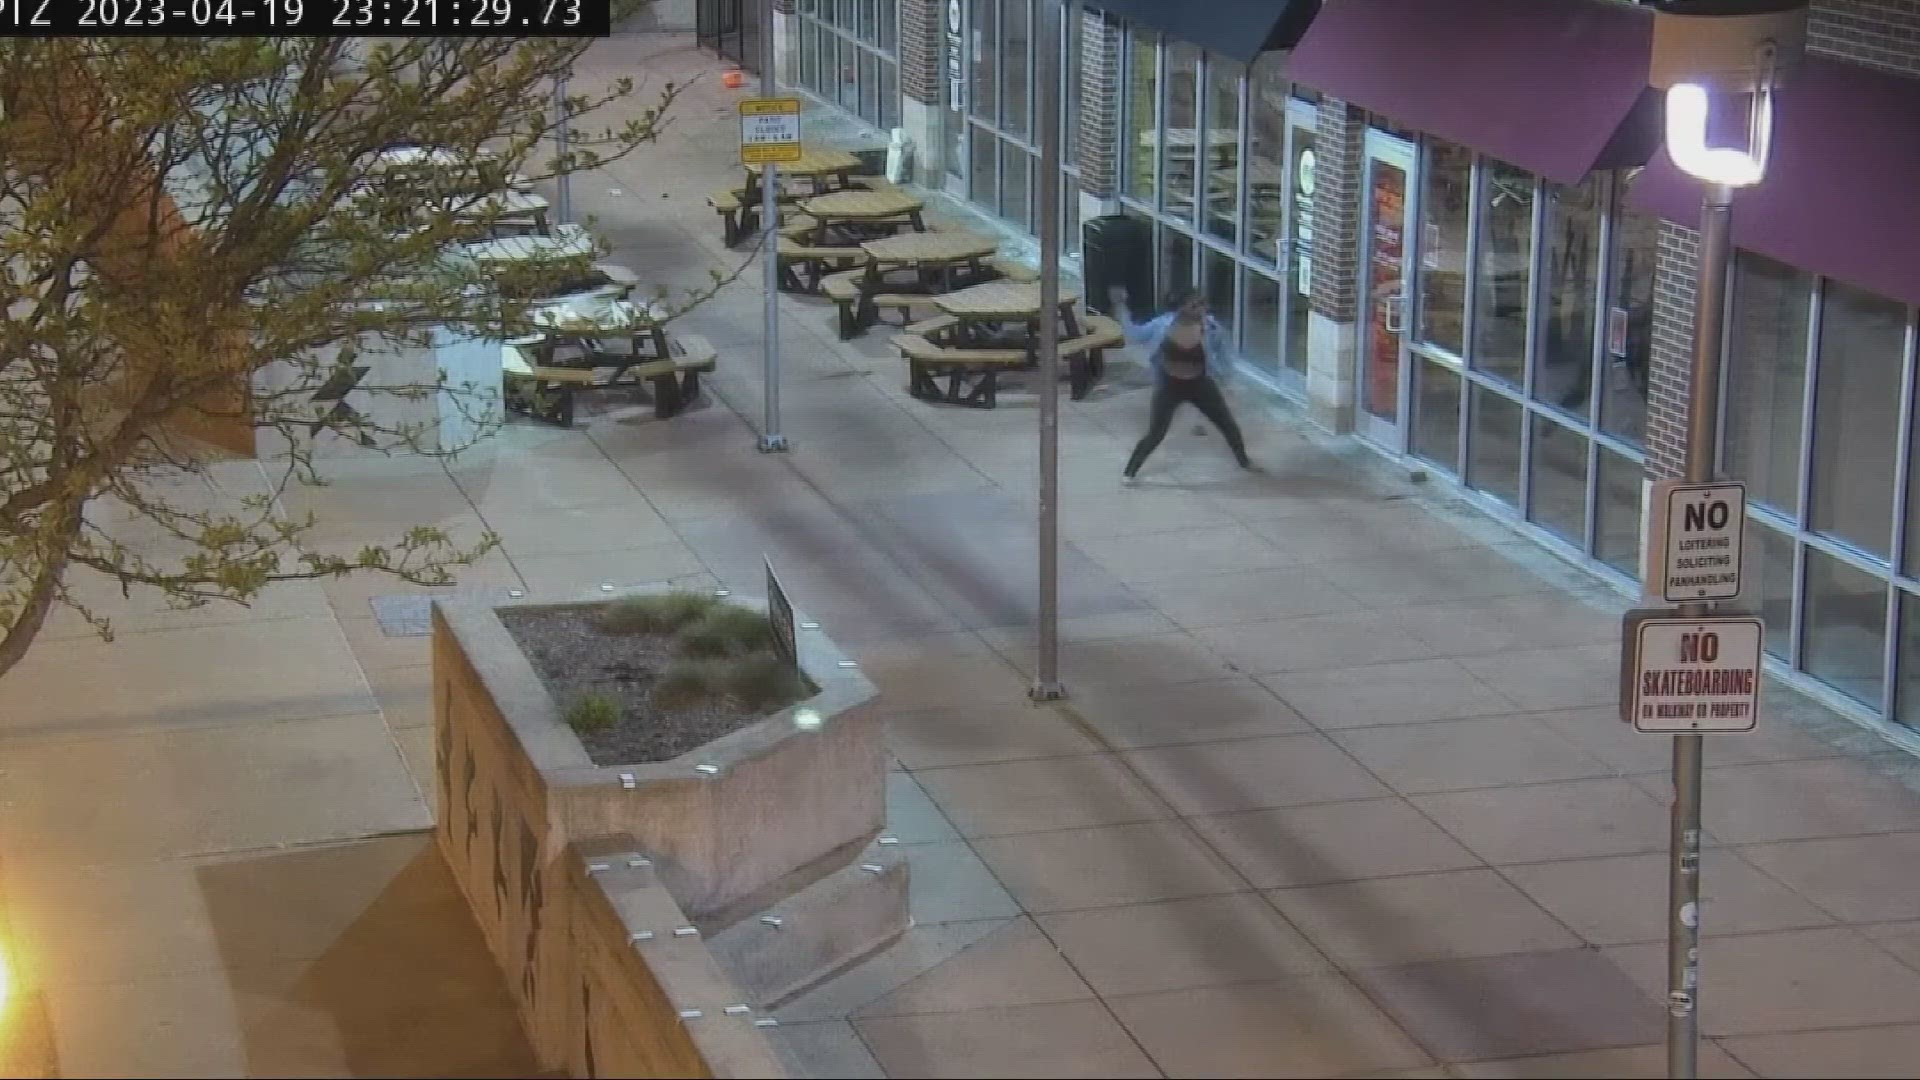 A protester can be seen throwing an object through the window of an Akron business in the footage.